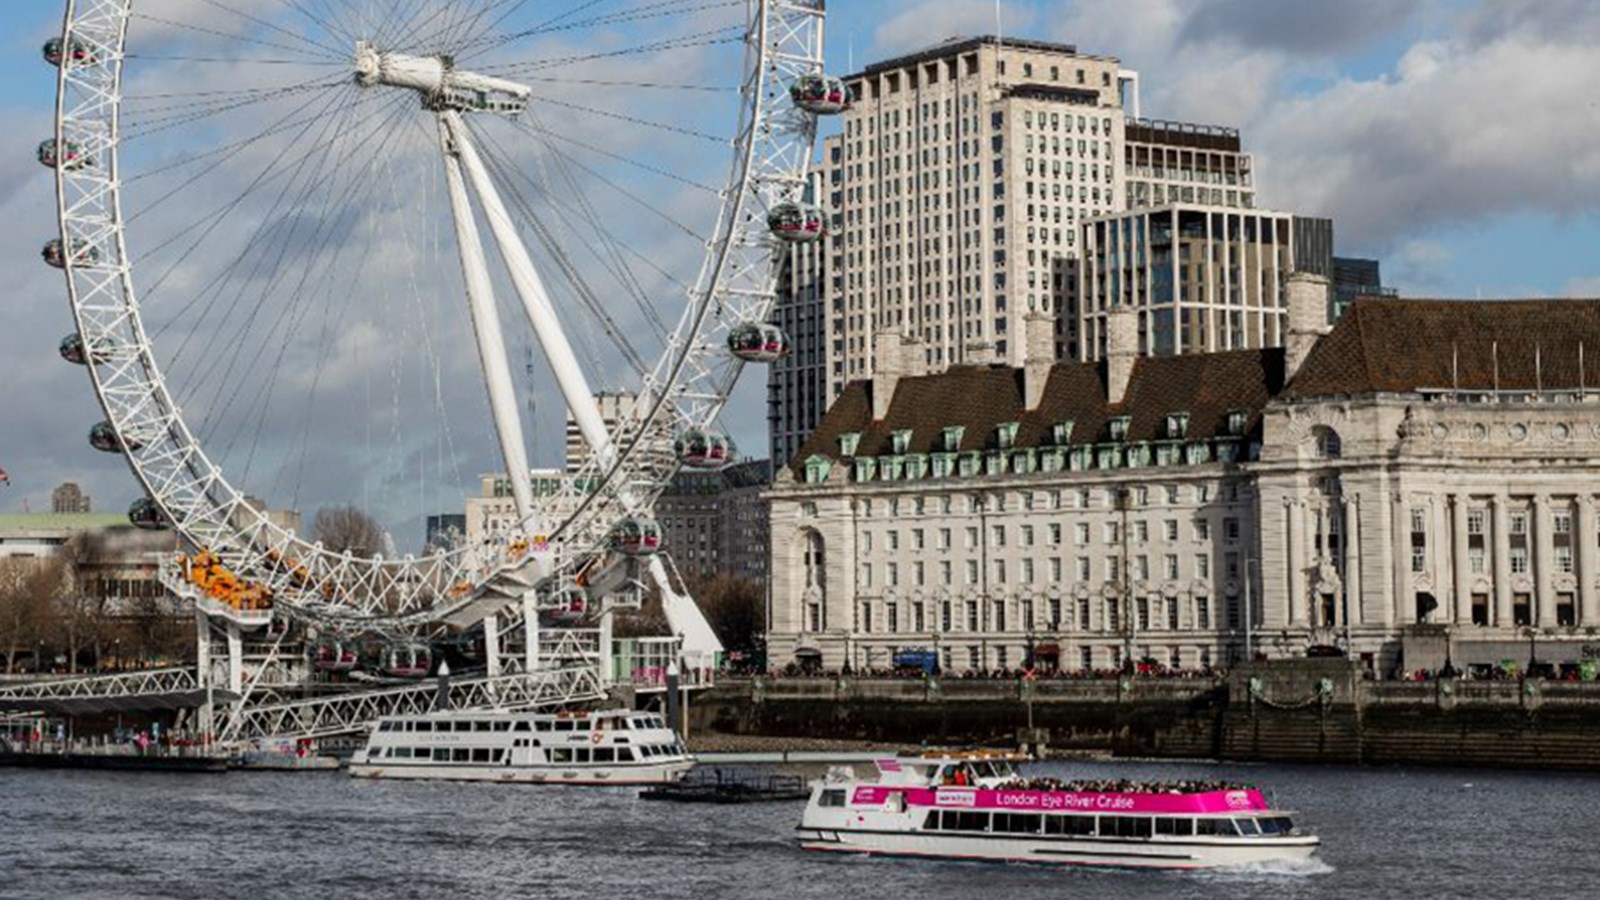 london eye river cruise contact number